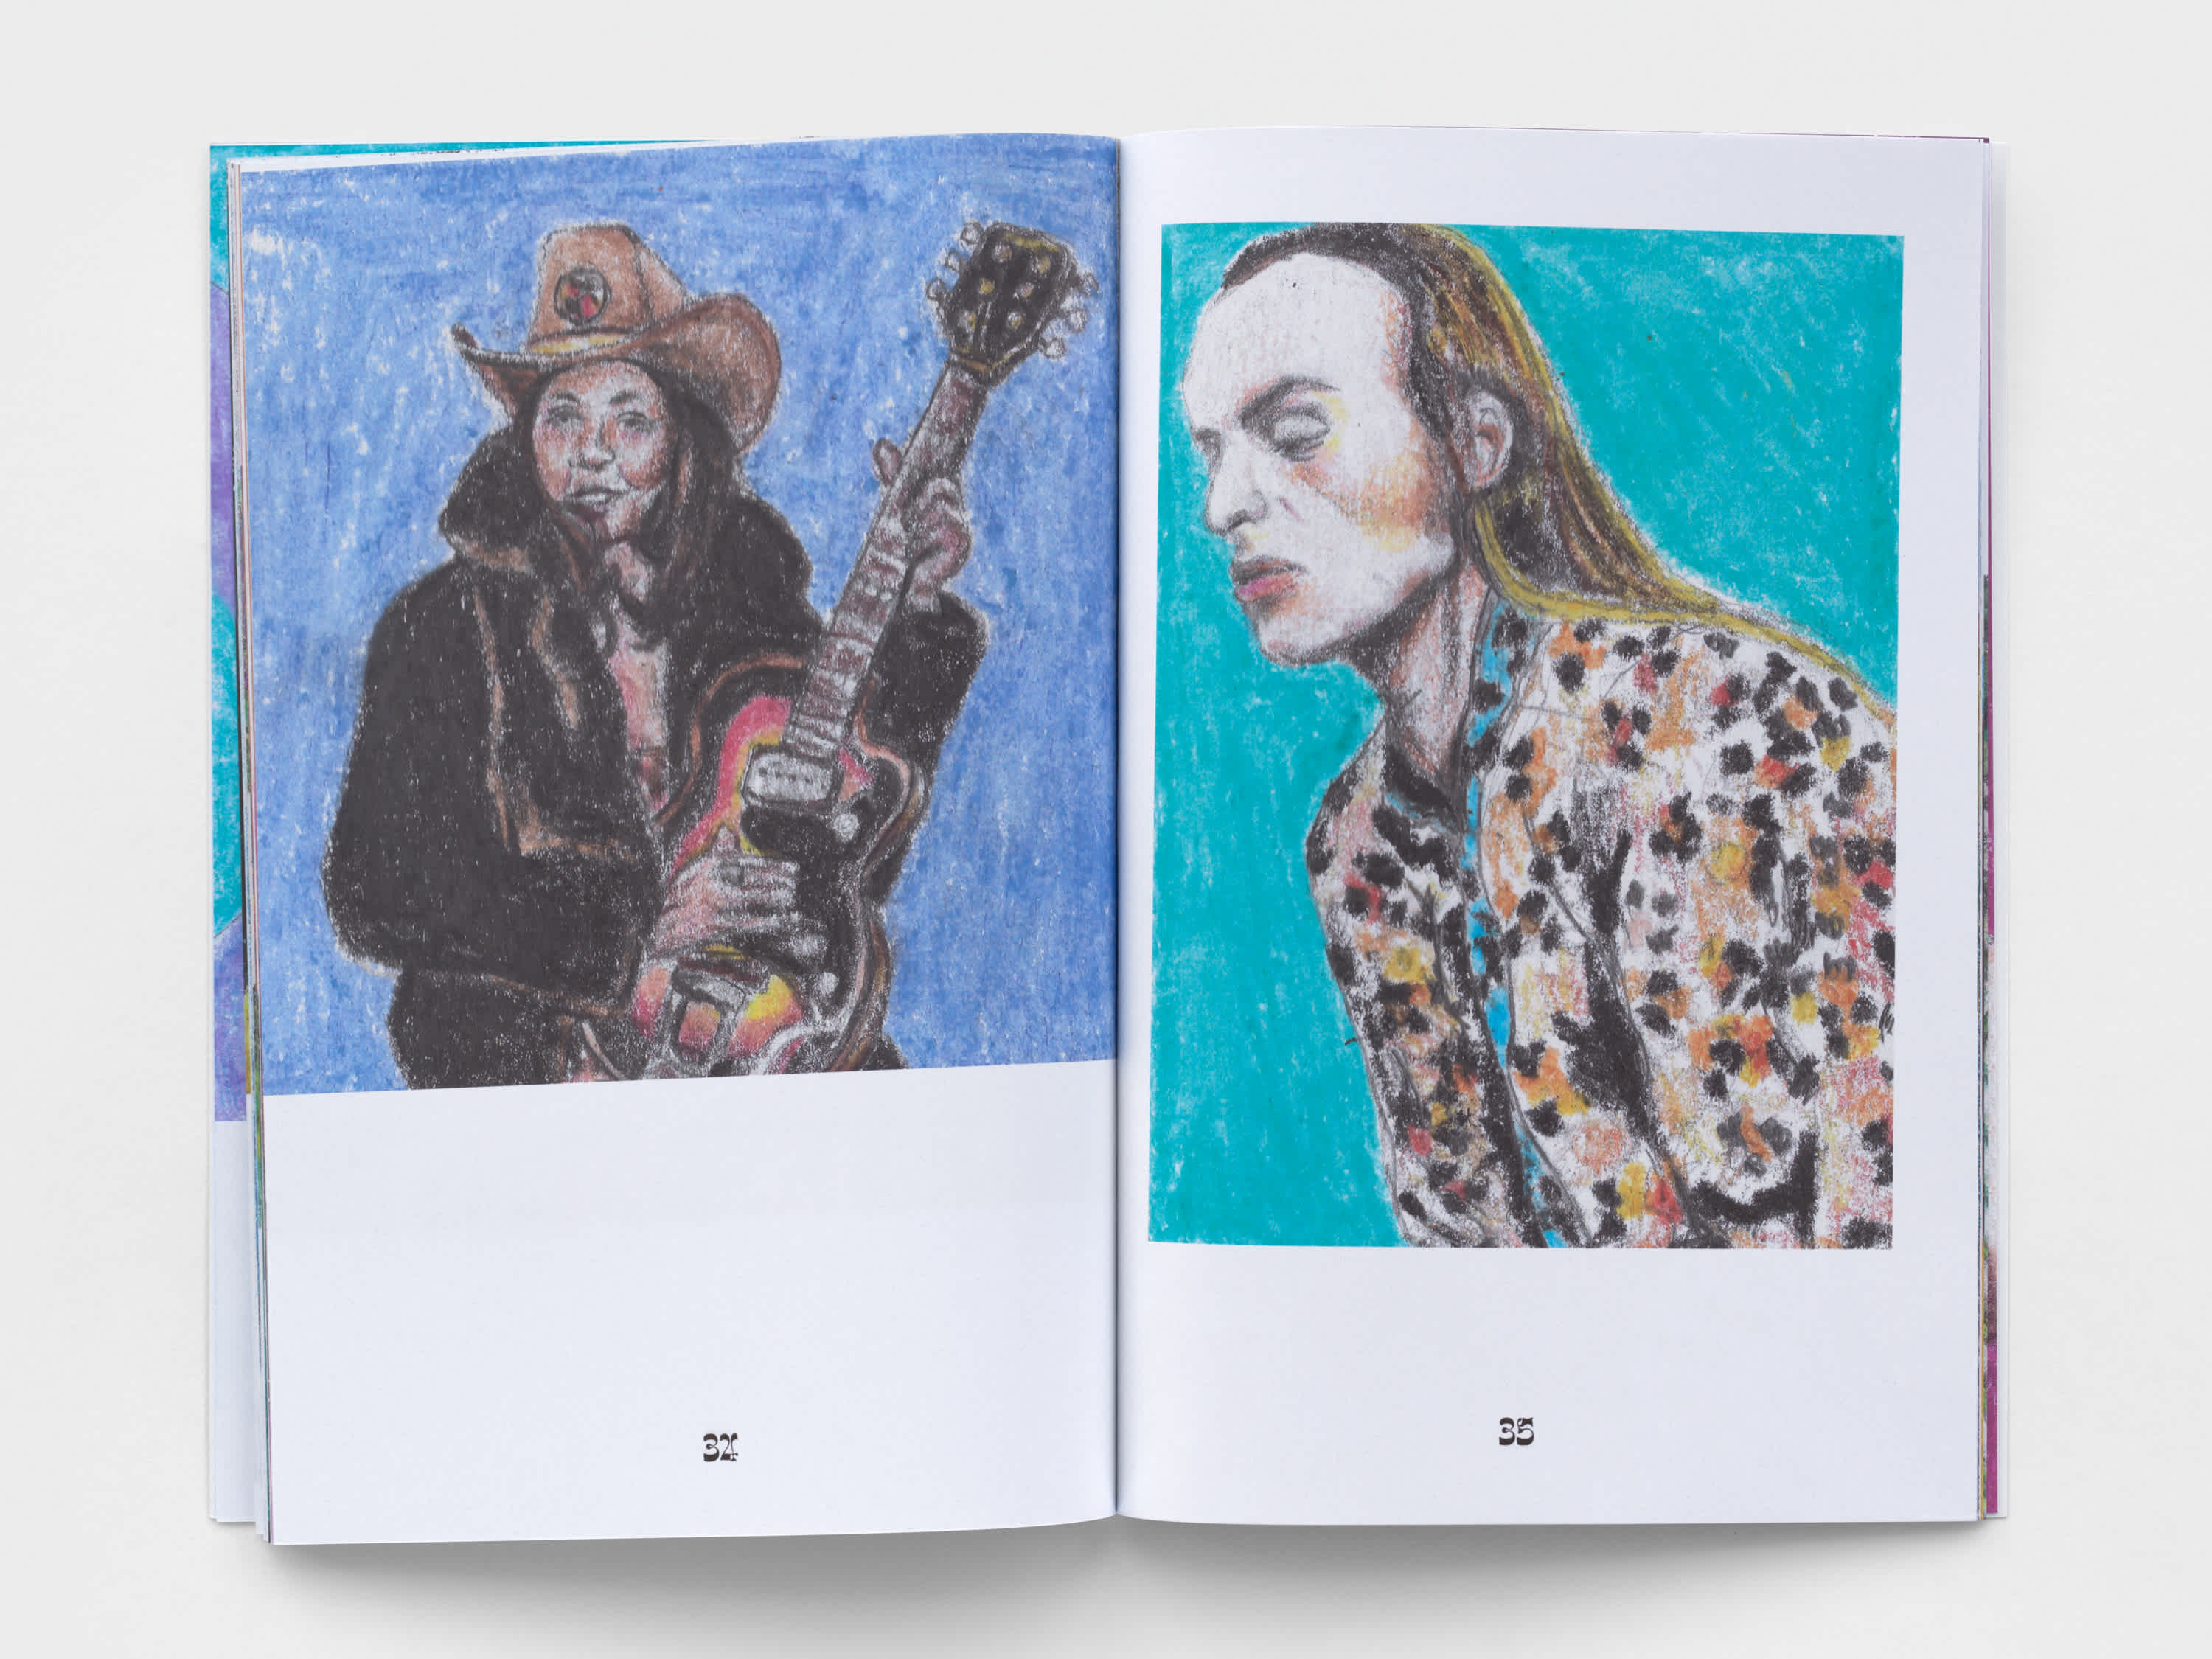 An open book. Jessie Mae Hemphill is depicted in crayon on the left page. A crayon drawing of Brian Eno is on the right page. 